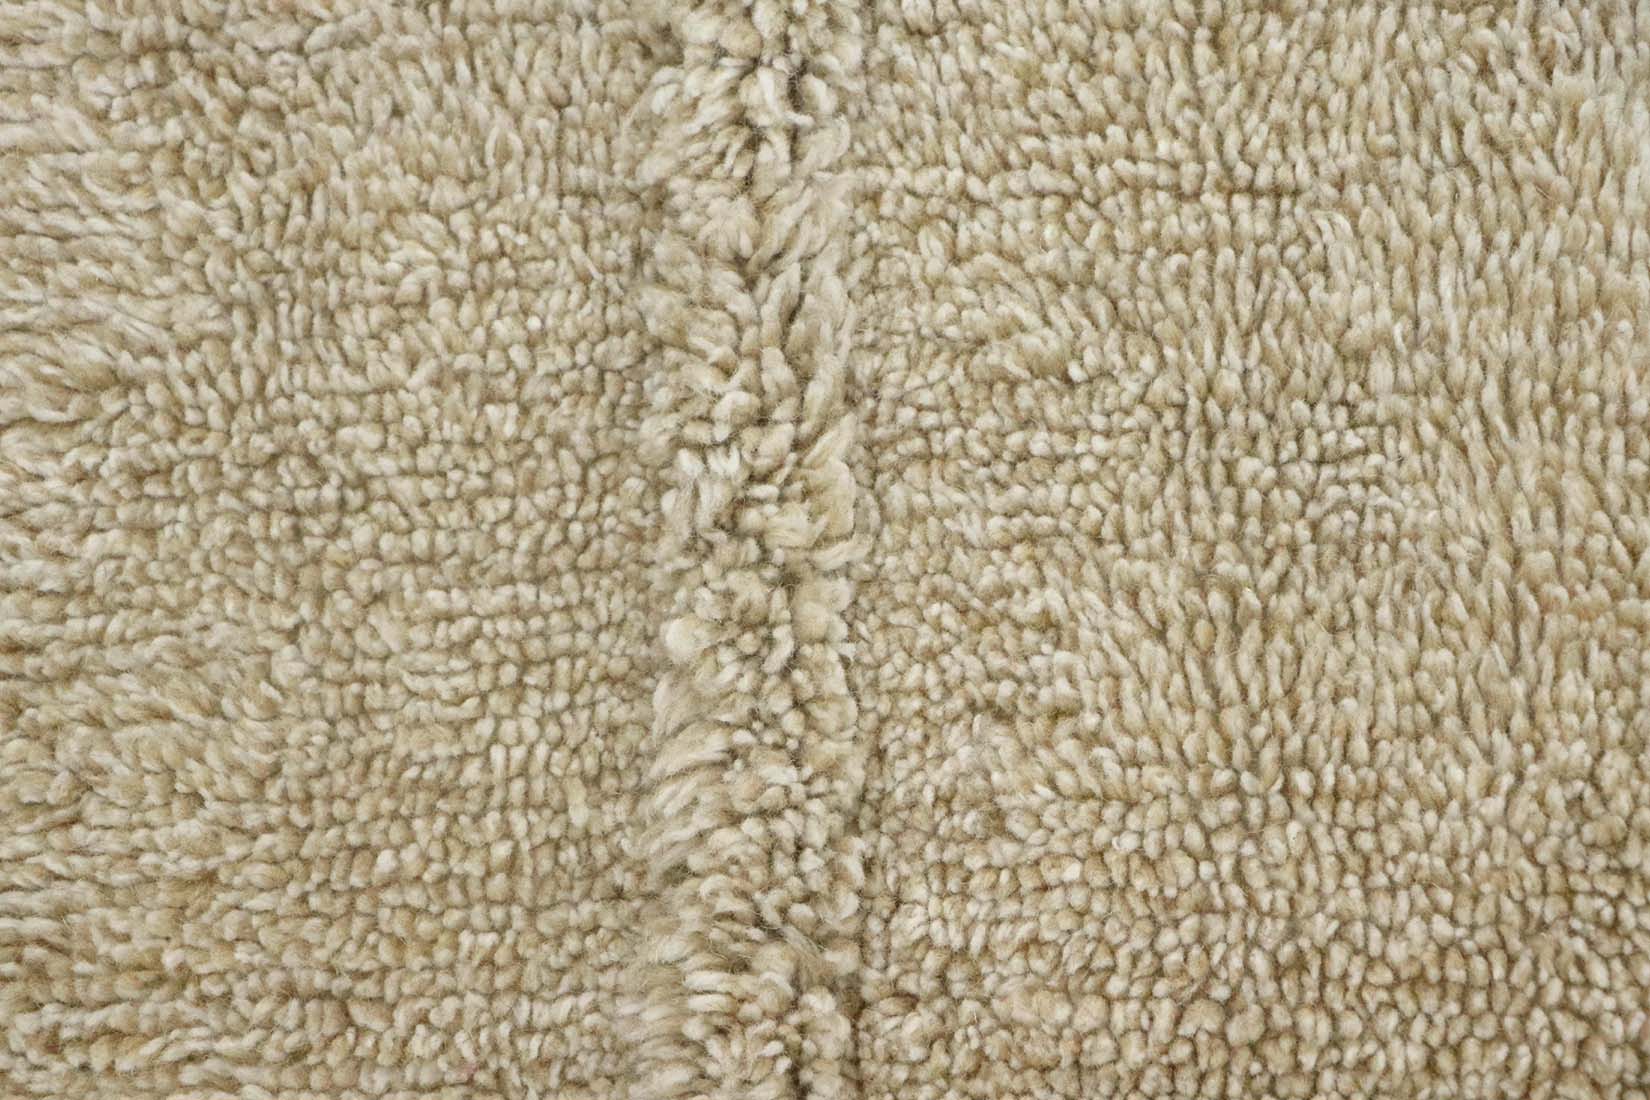 beige washable wool rug with textured detail
